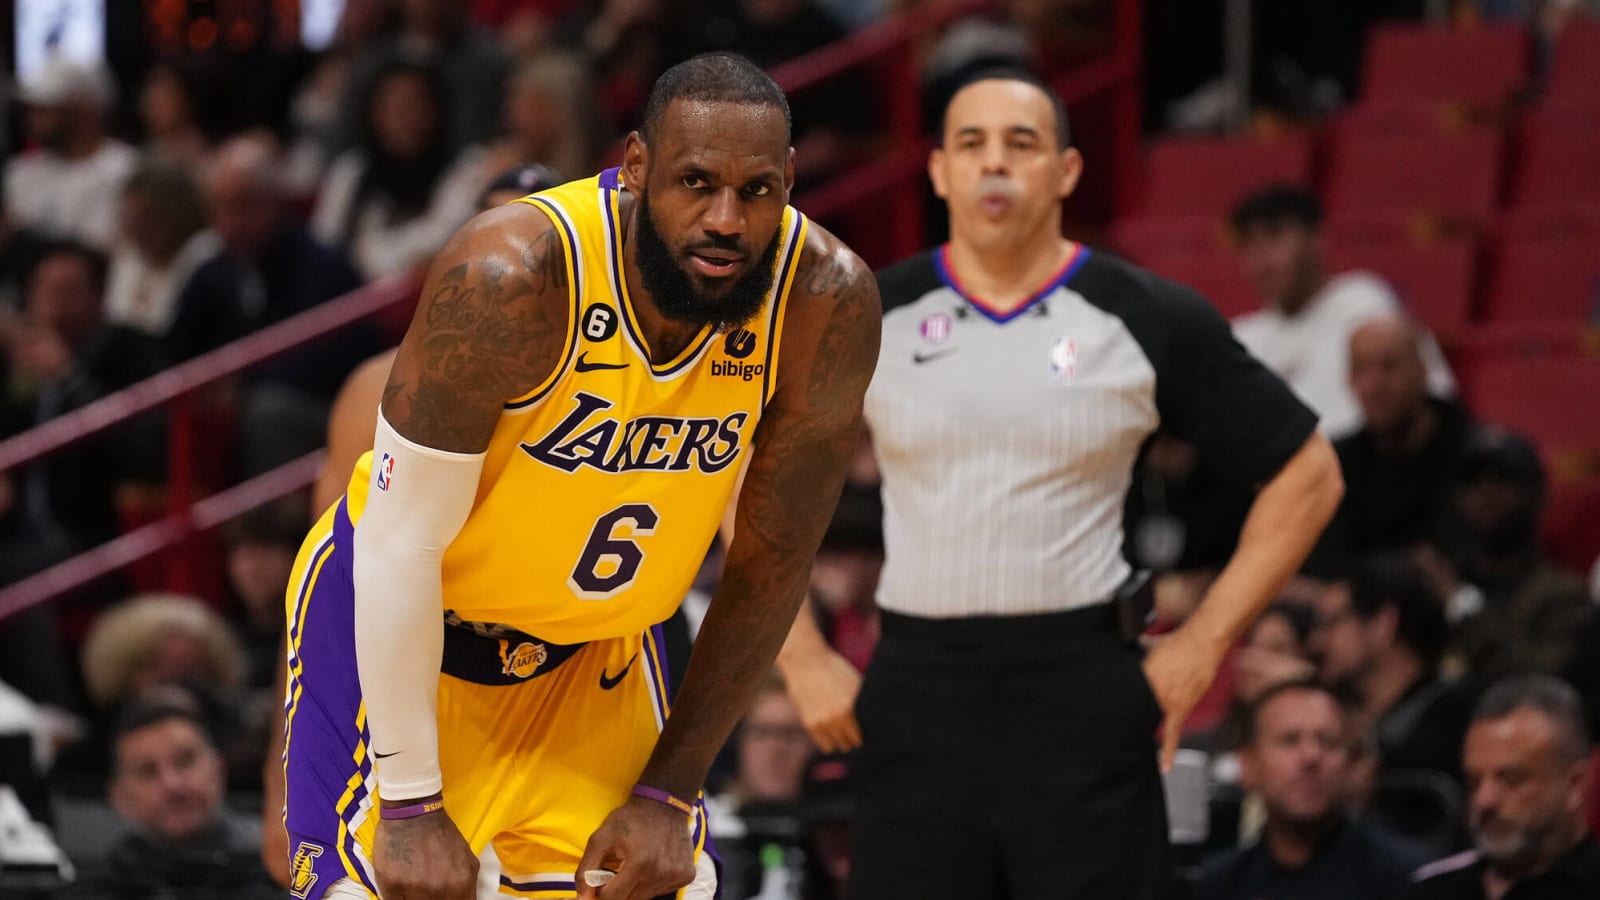 LeBron James committed to Olympics, hopes to end career with Lakers